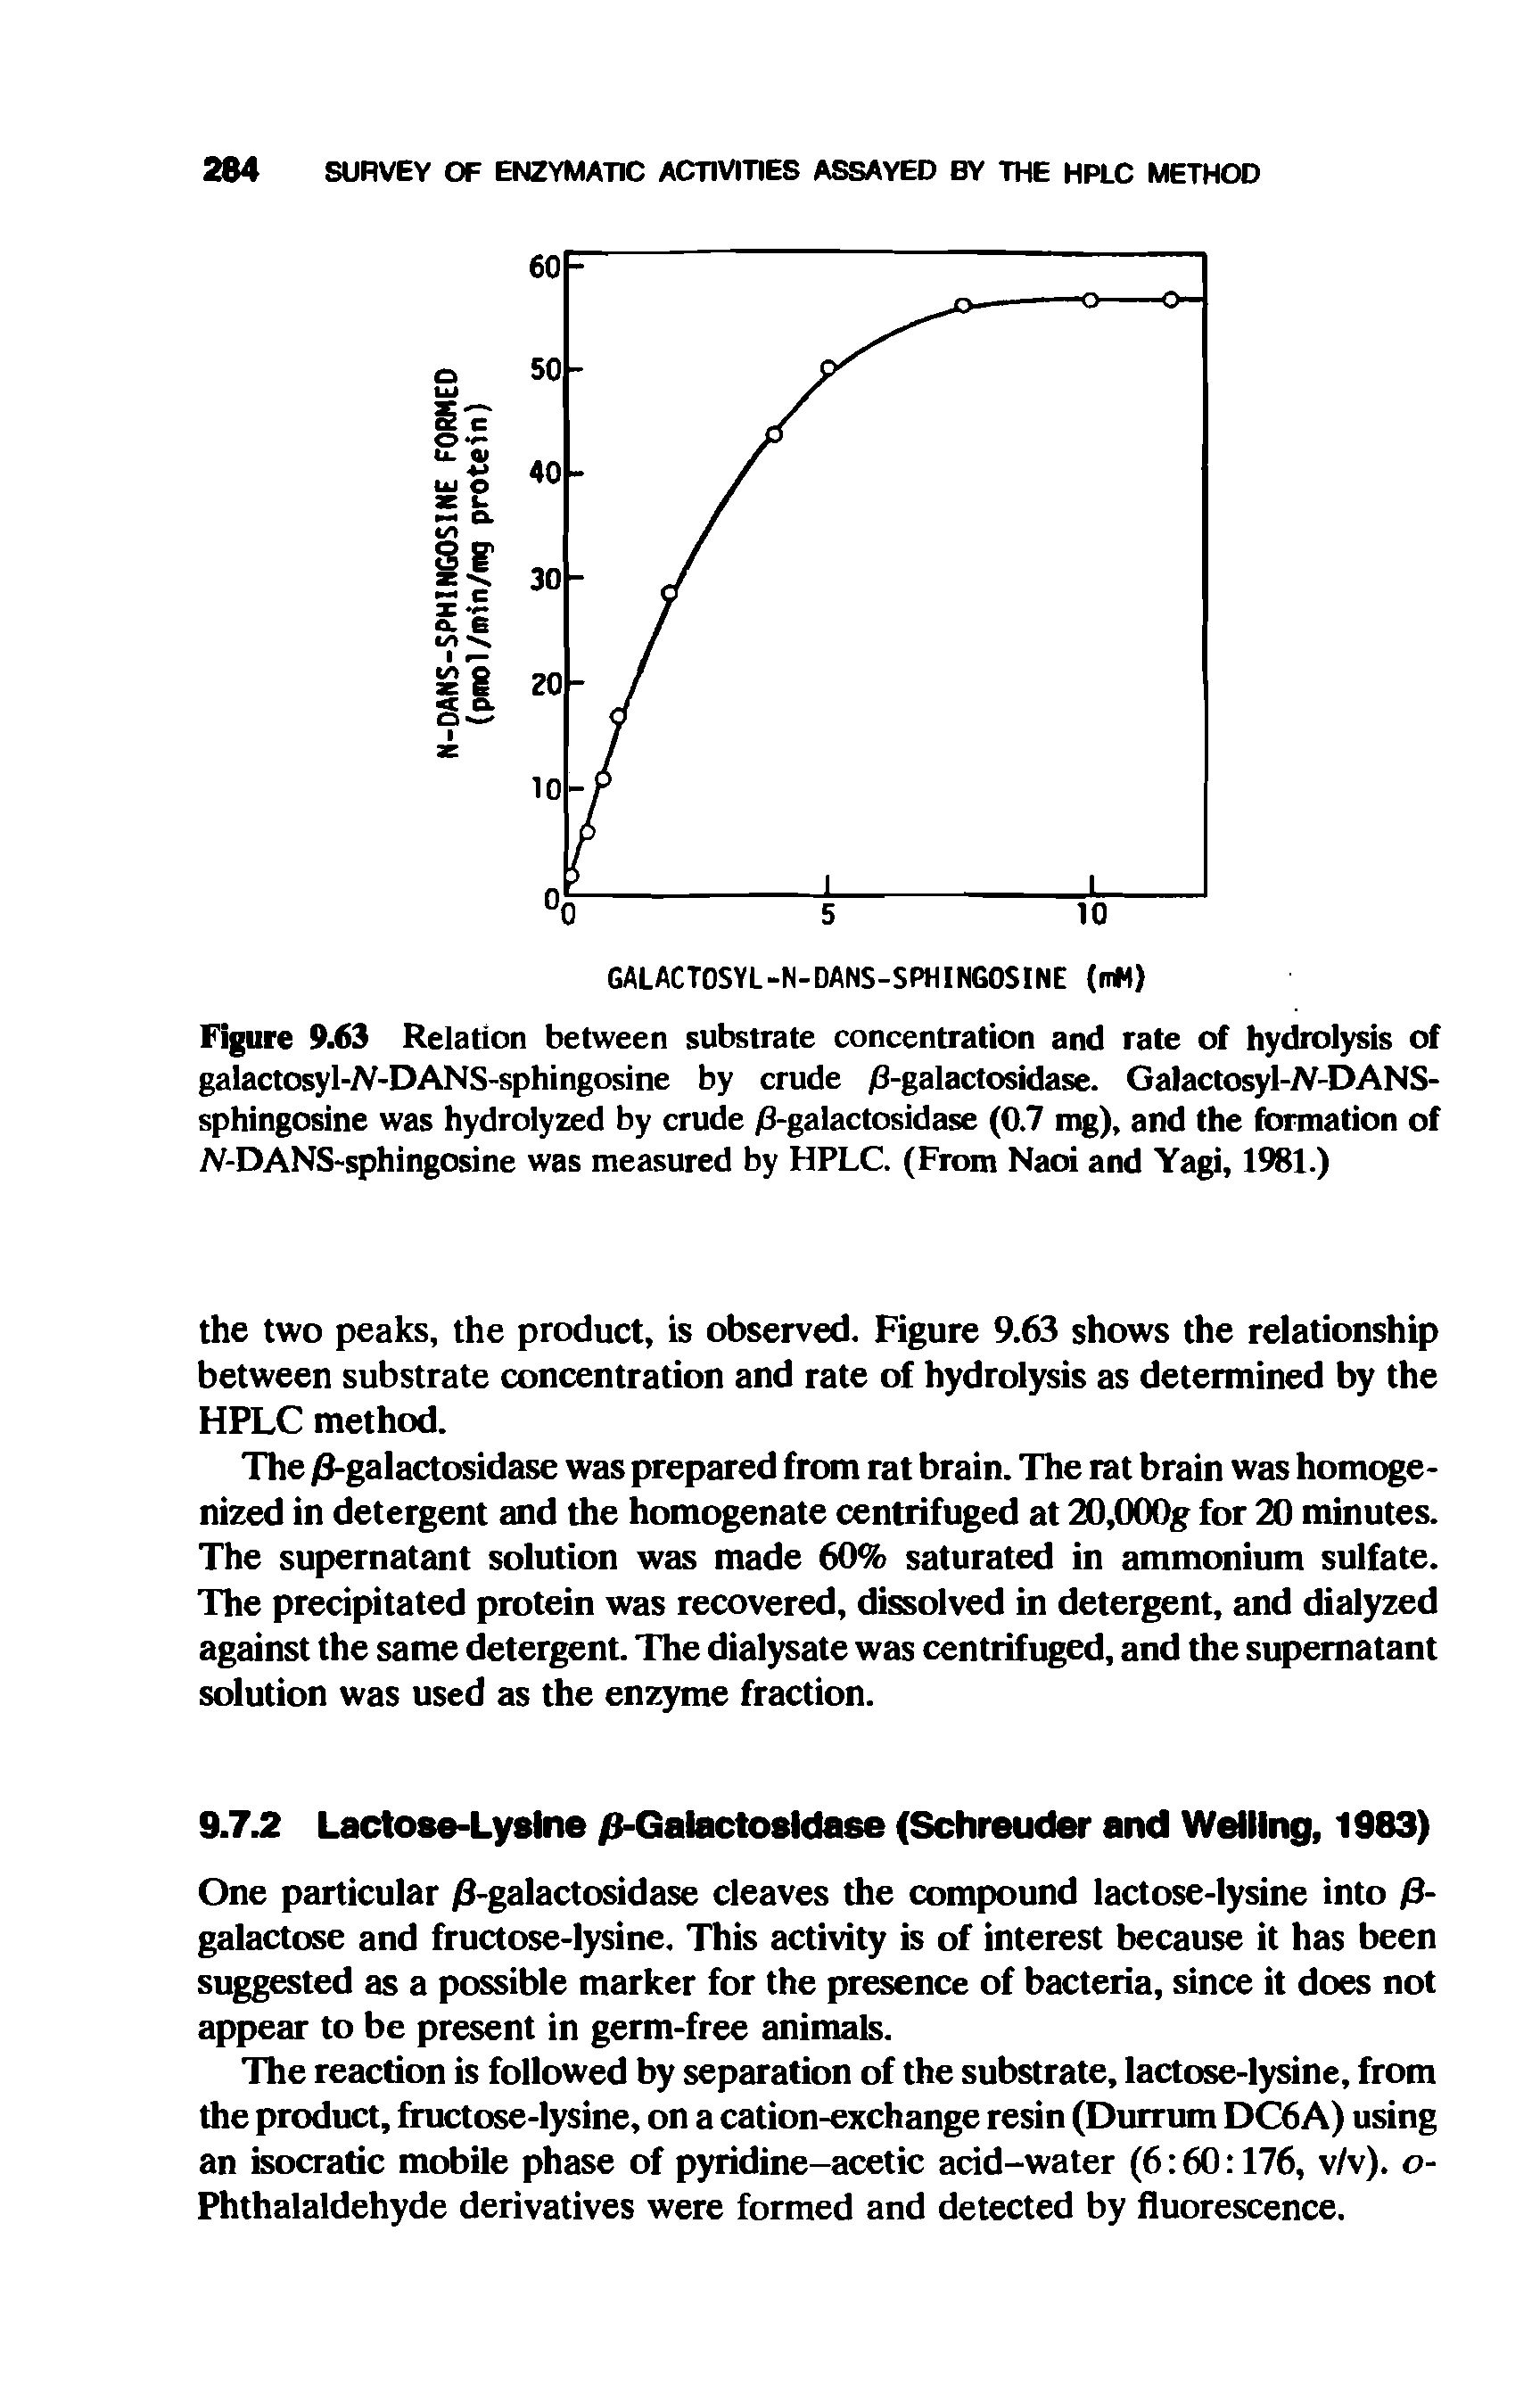 Figure 9.63 Relation between substrate concentration and rate of hydrolysis of galactosyl-N-DANS-sphingosine by crude /3-galactosidase. Galactosyl-W-DANS-sphingosine was hydrolyzed by crude /3-galactosidase (0.7 mg), and the formation of TV-DANS-sphingosine was measured by HPLC. (From Naoi and Yagi, 1981.)...